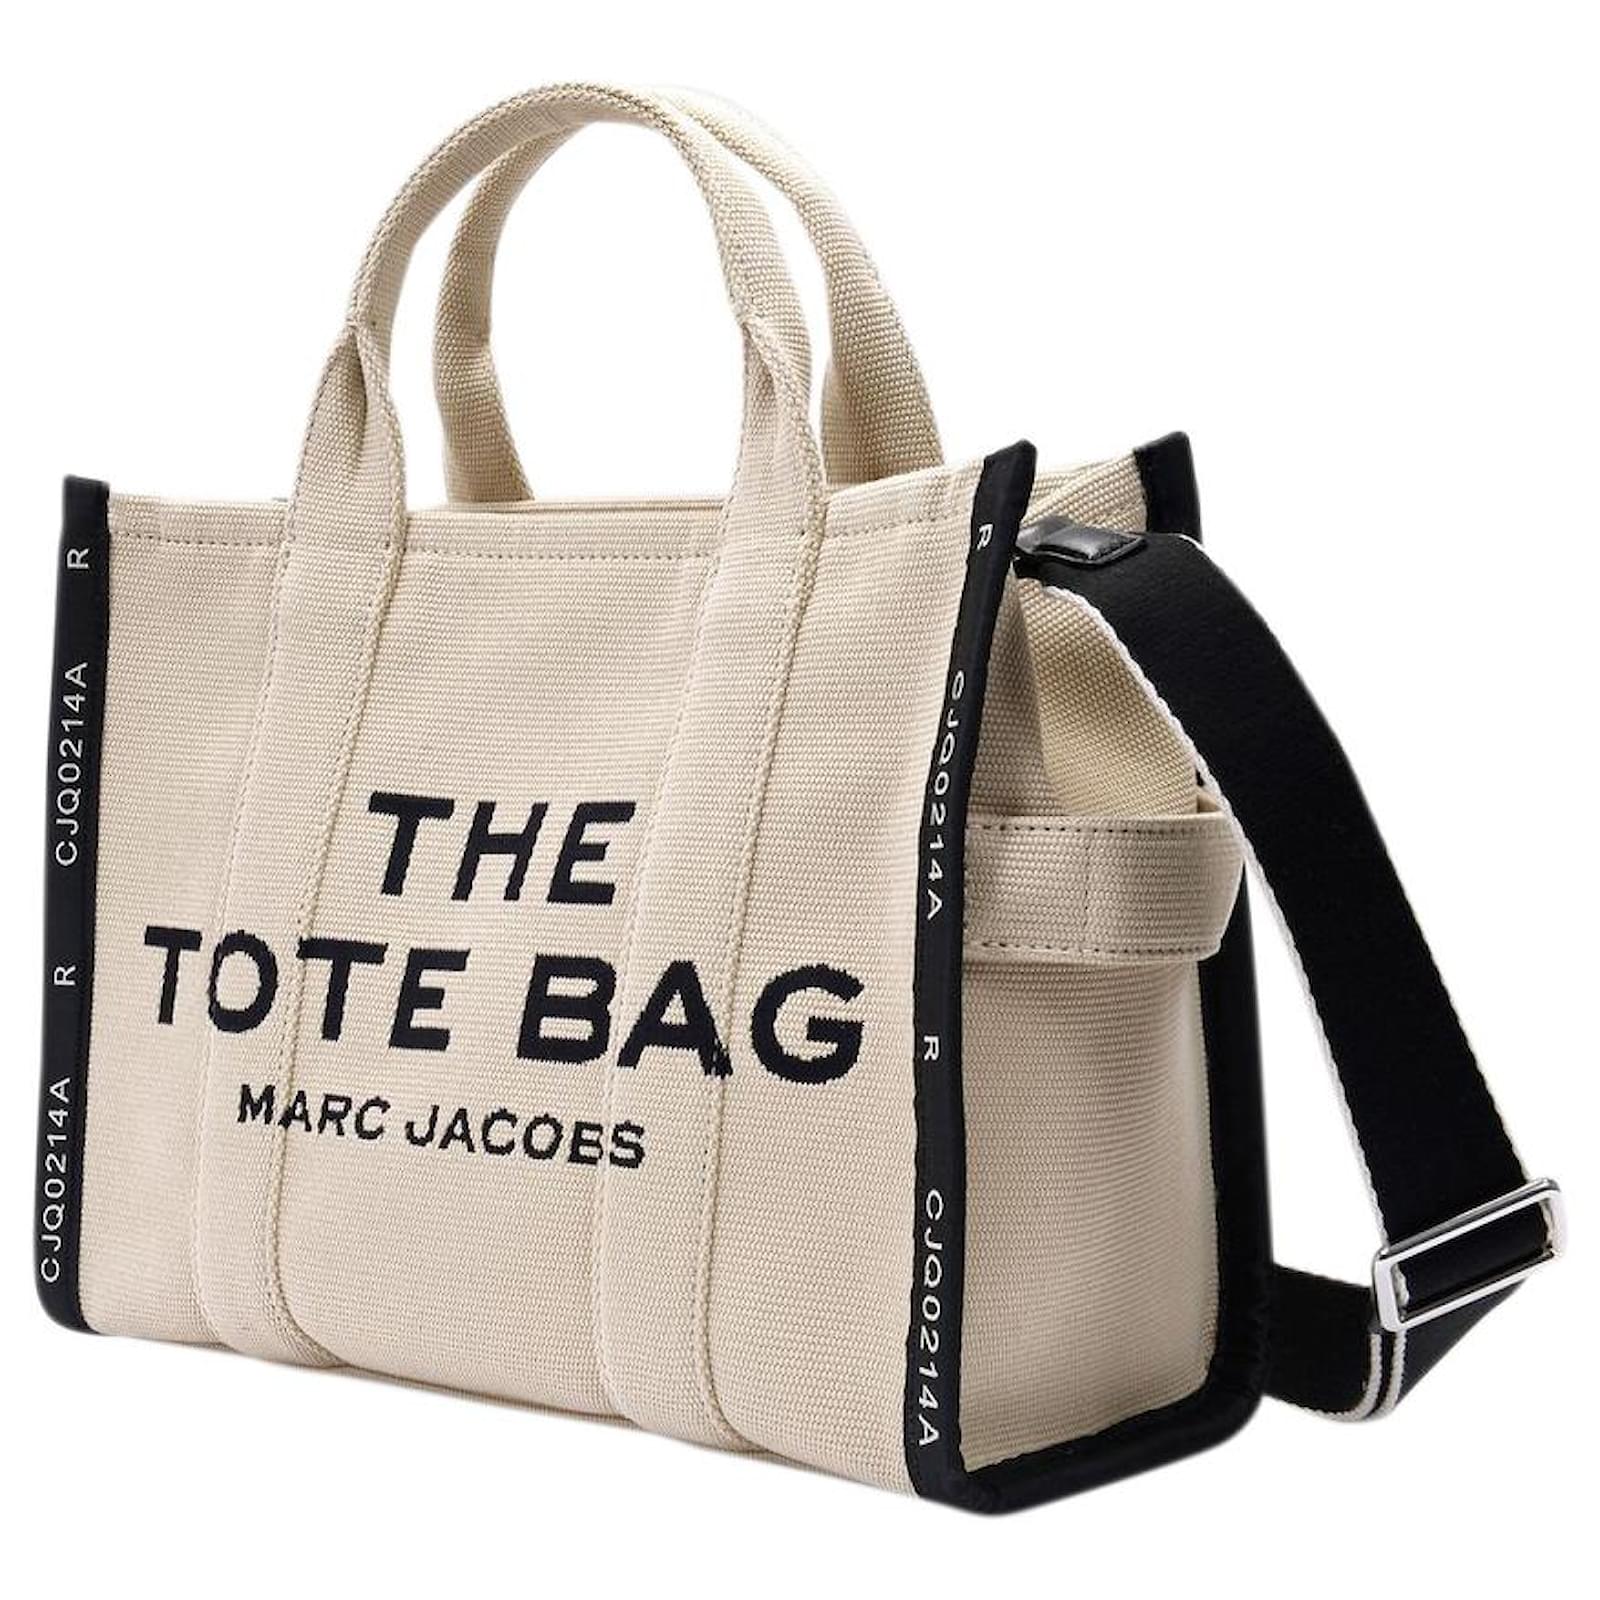 The Marc Jacobs Tote Bag in canvas